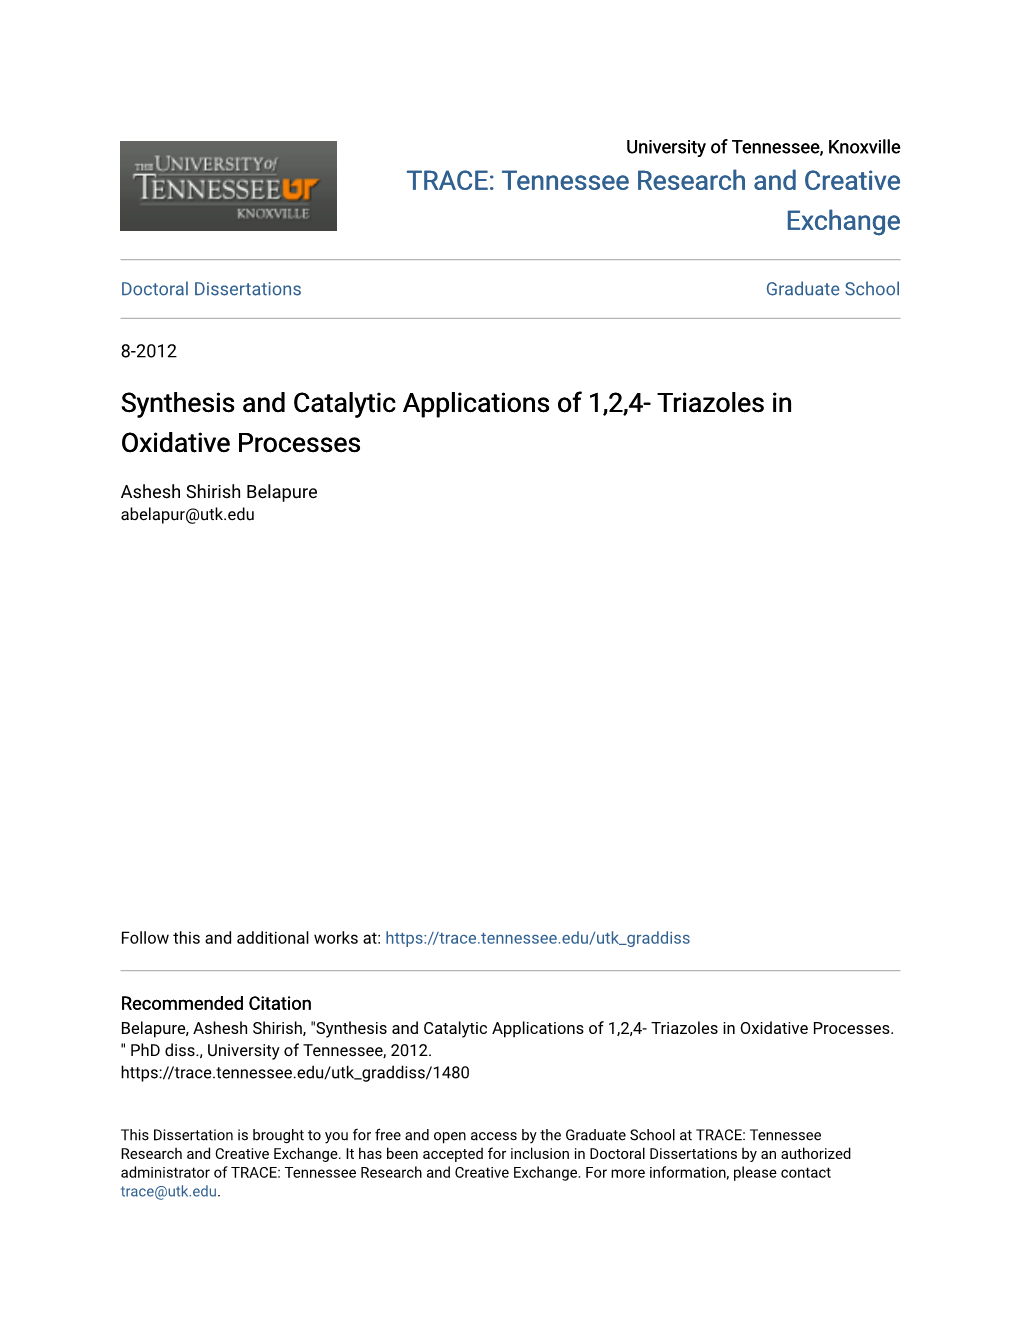 Synthesis and Catalytic Applications of 1,2,4- Triazoles in Oxidative Processes